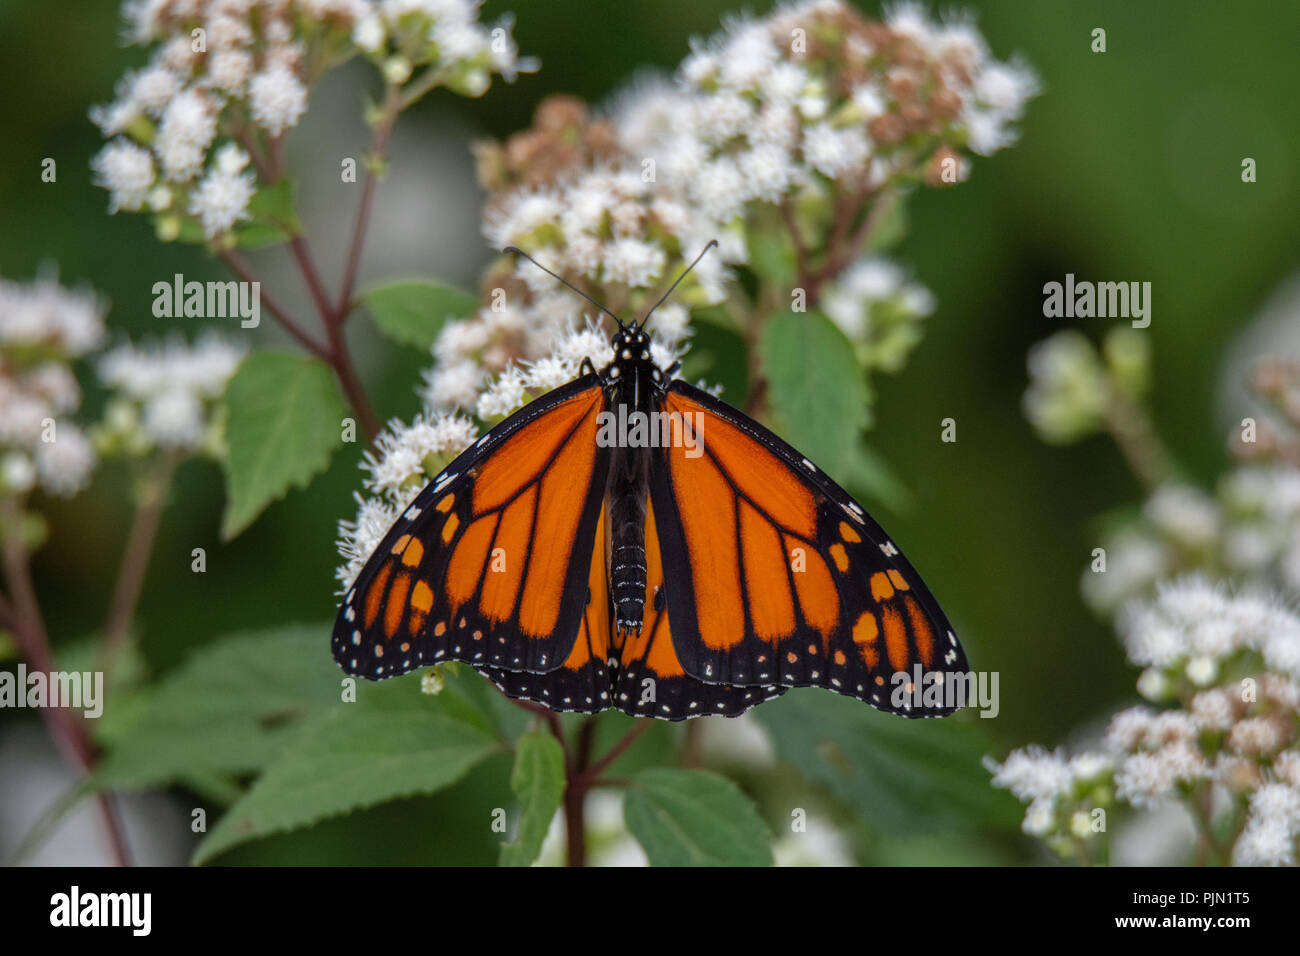 Monarch butterfly drinking nectar from flower Stock Photo